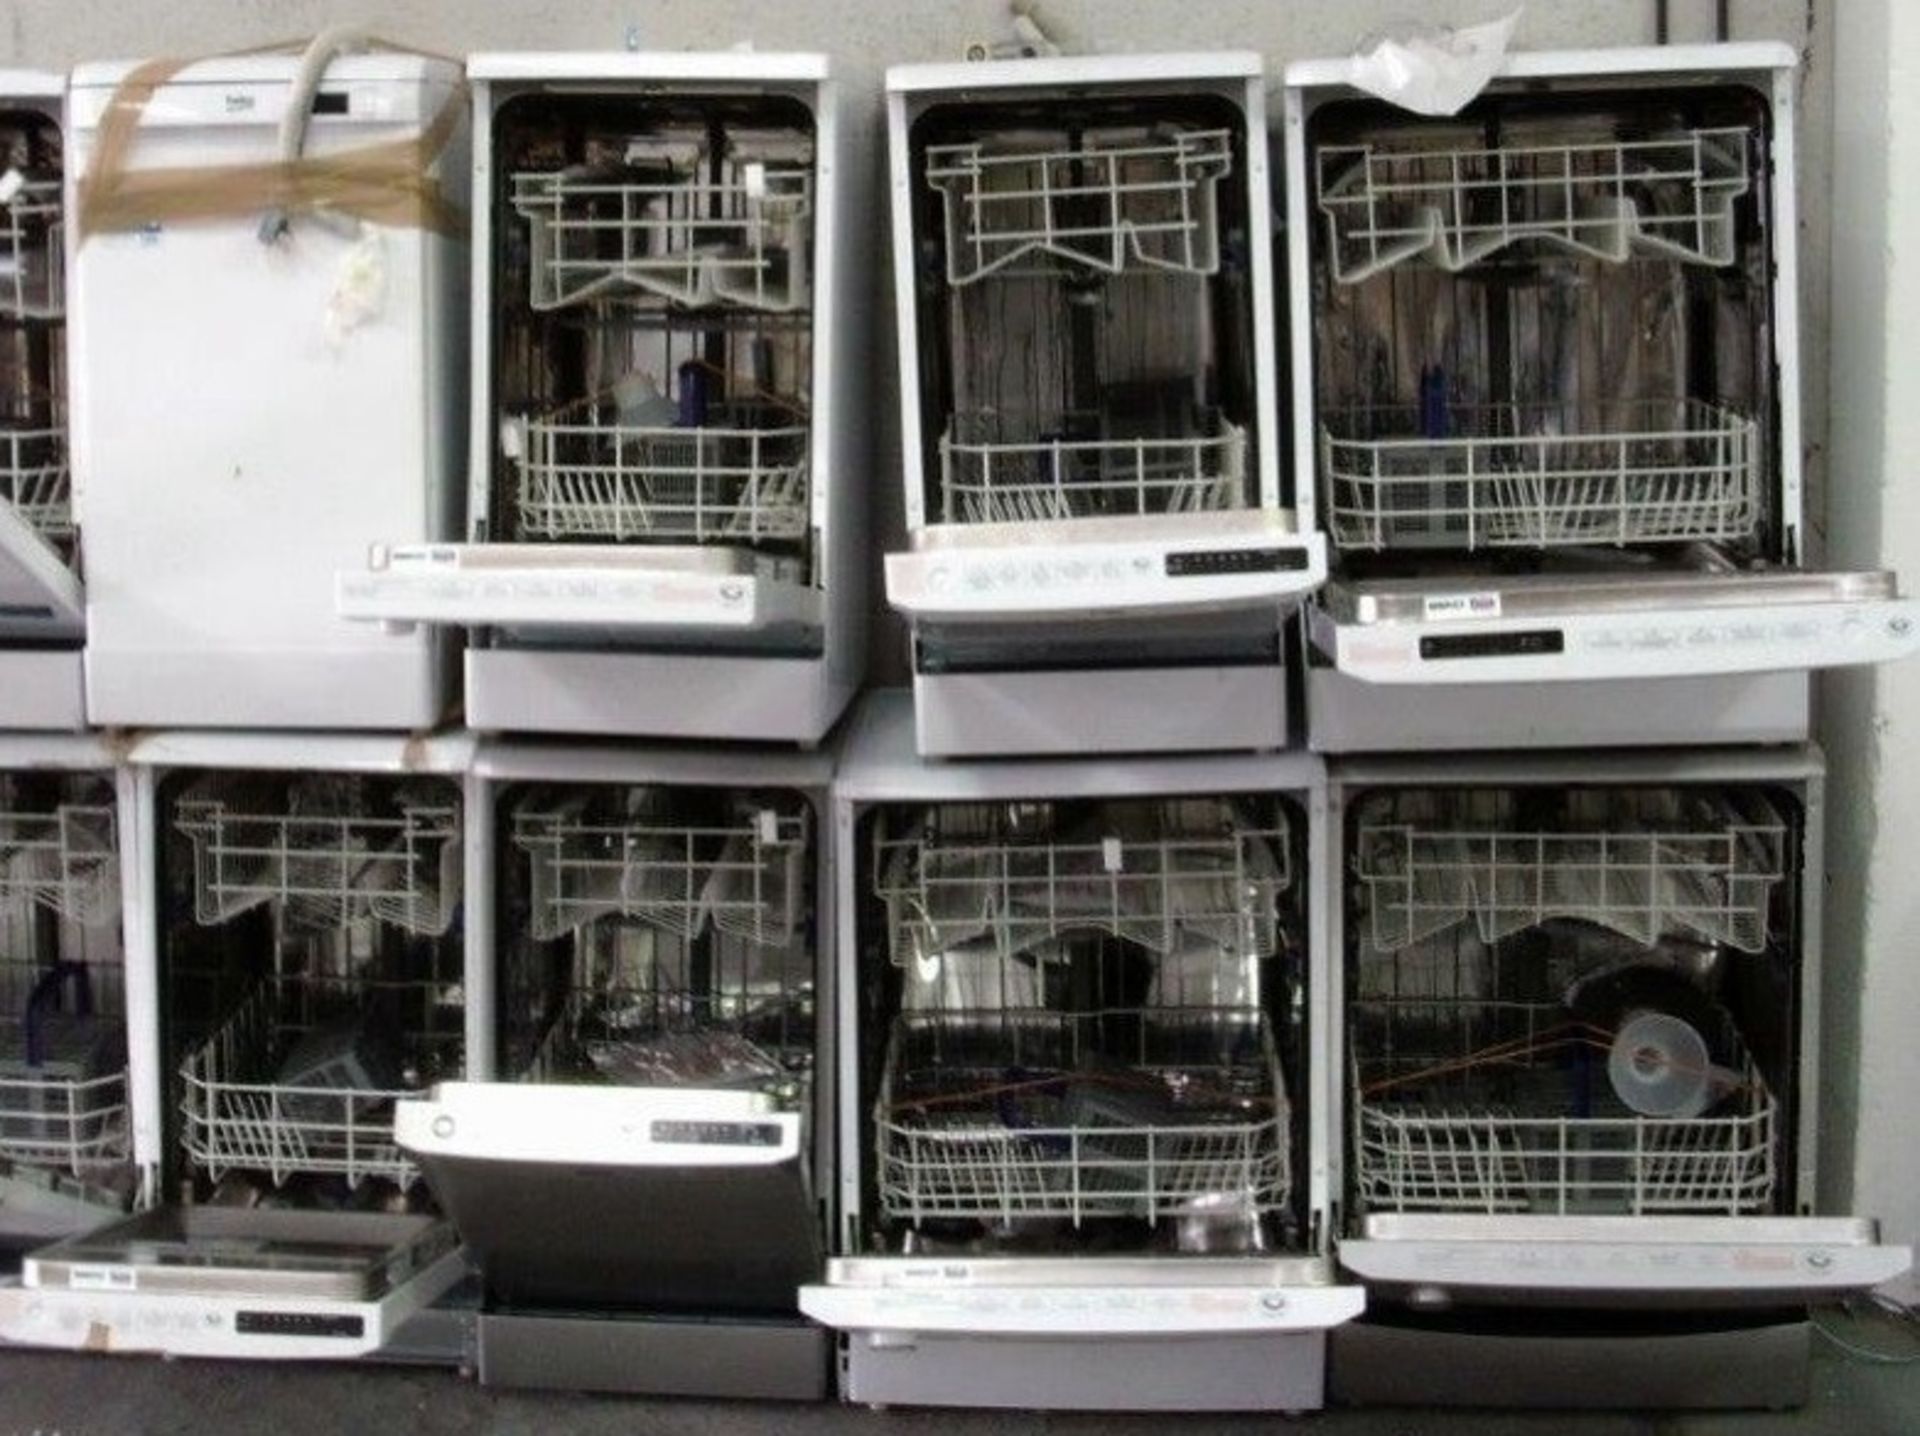 1 x Pallet of Unchecked Customer Raw Returns - BEKO DISHWASHERS - All Current Models - CL055 - Ref